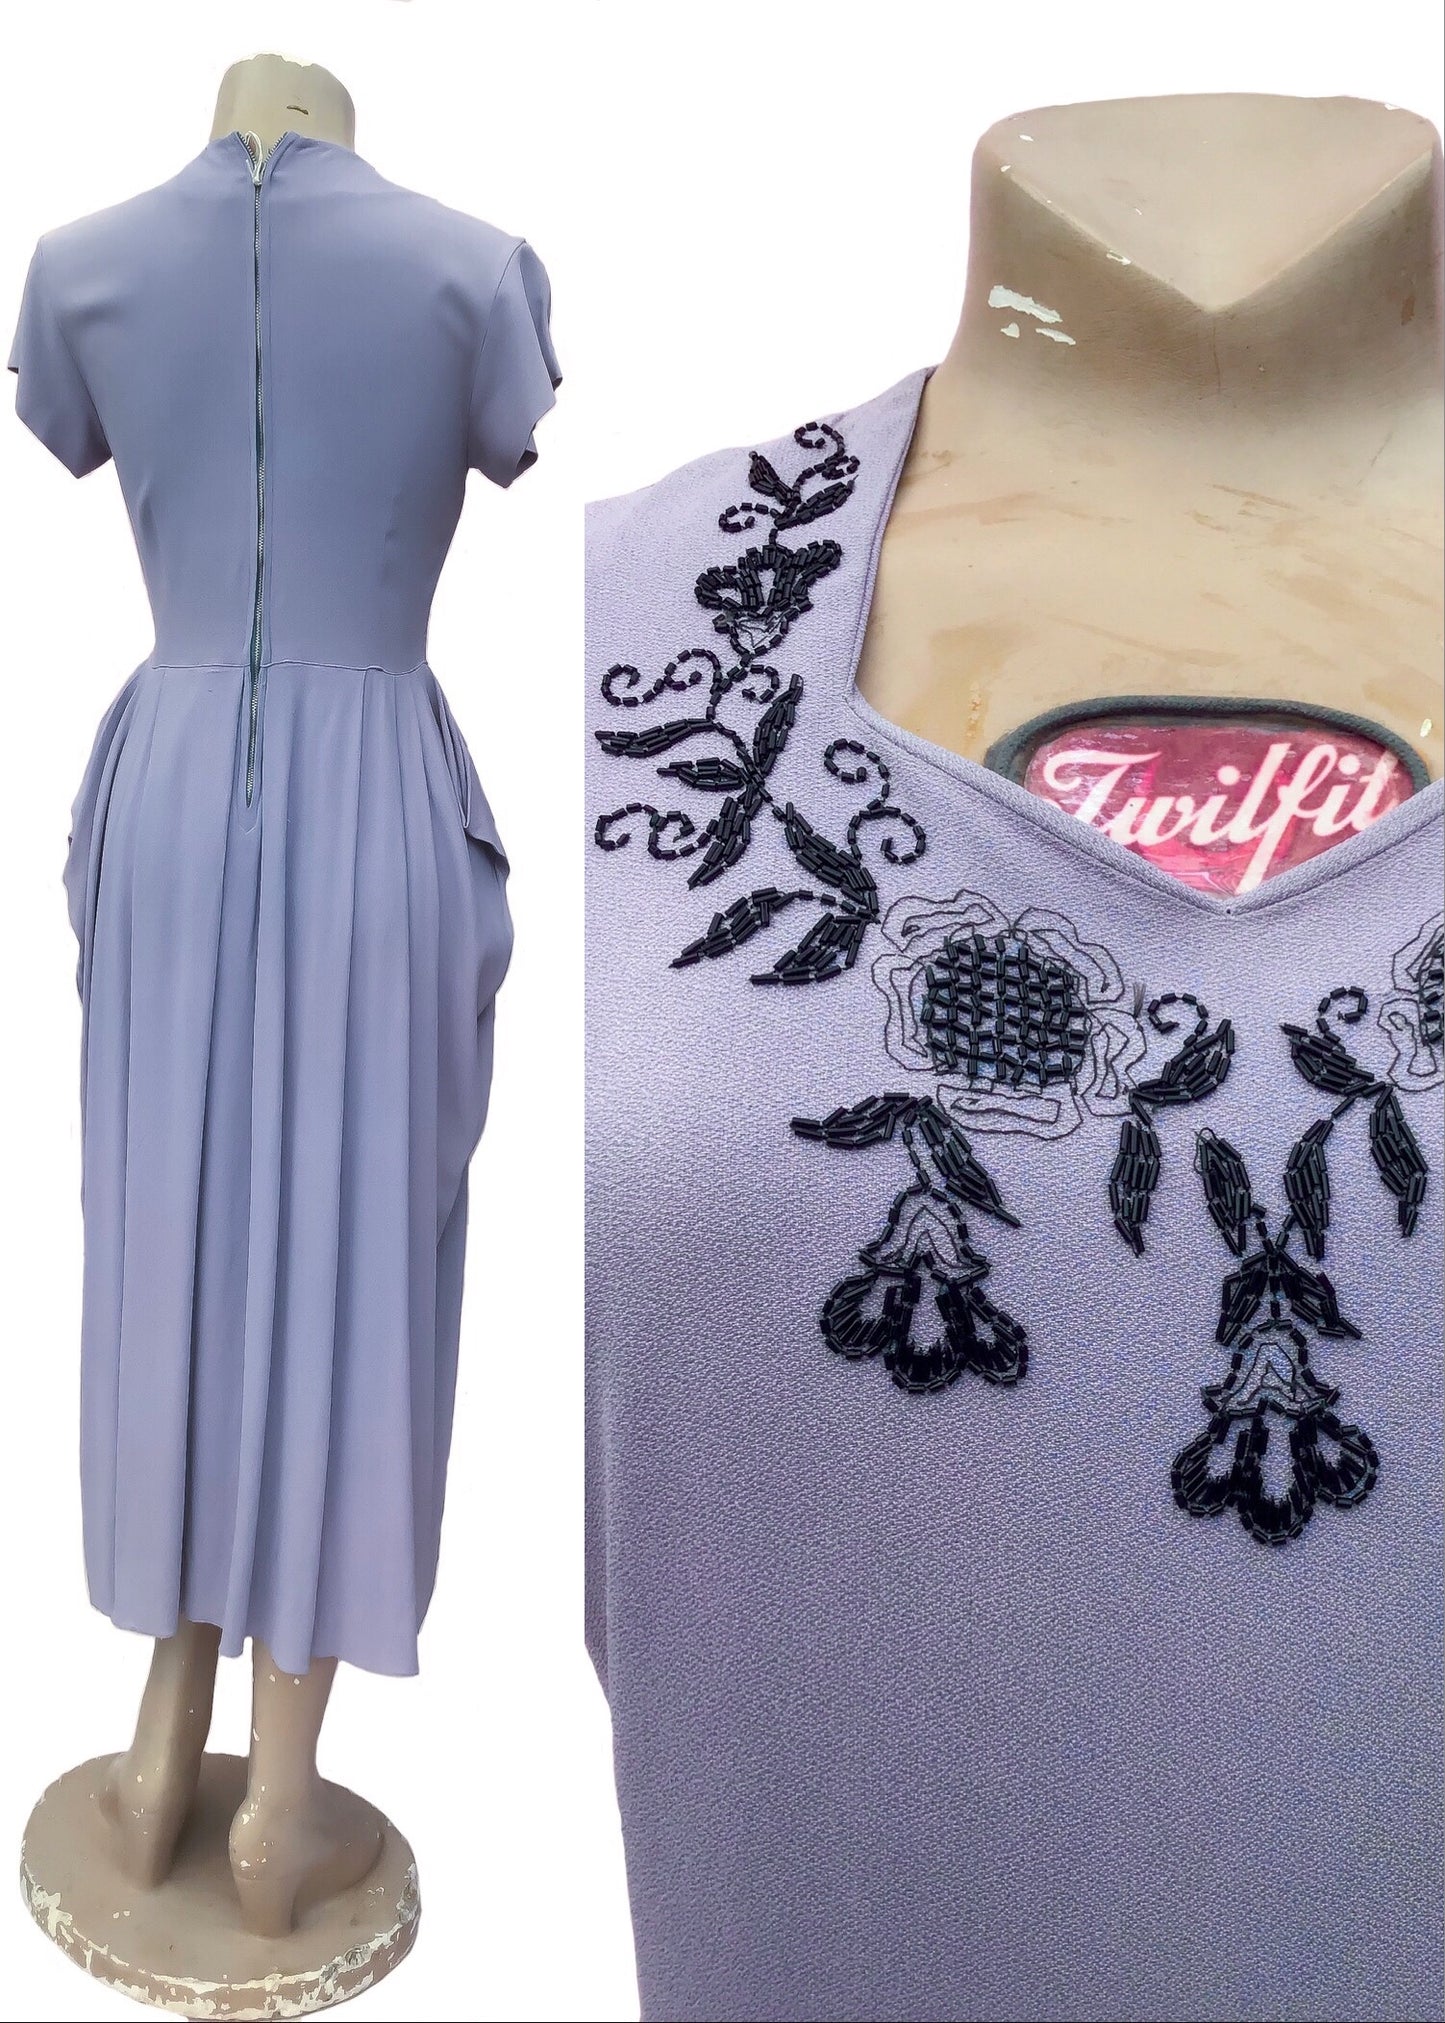 1940s Vintage Lilac Cocktail Dress with Black Bead Decorations